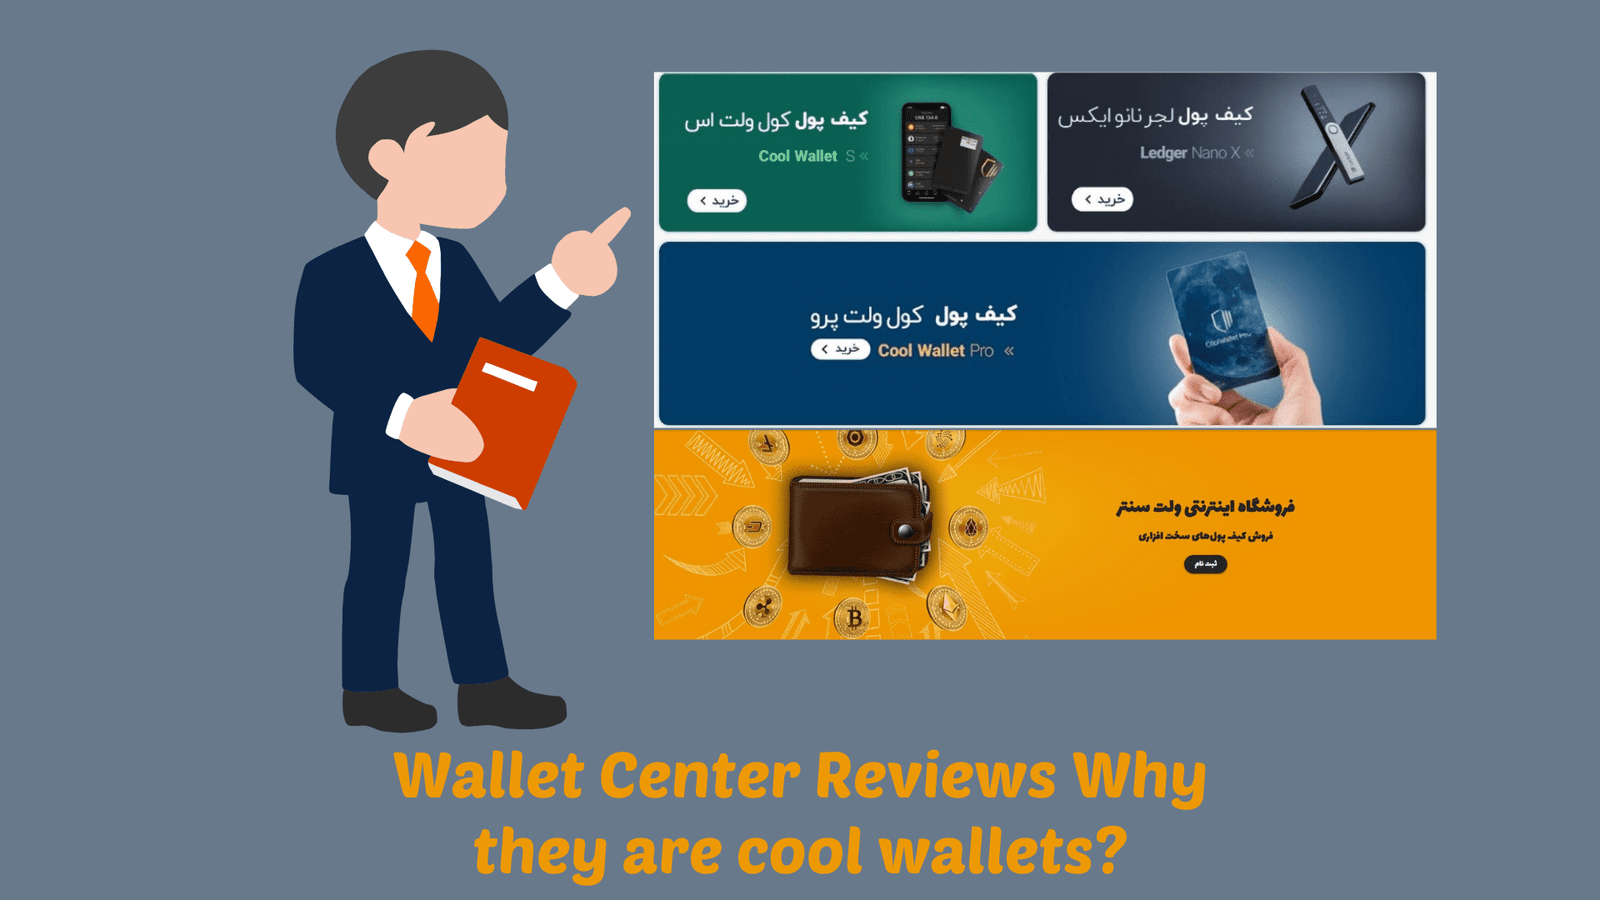 Wallet Center Reviews Why they are cool wallets Image